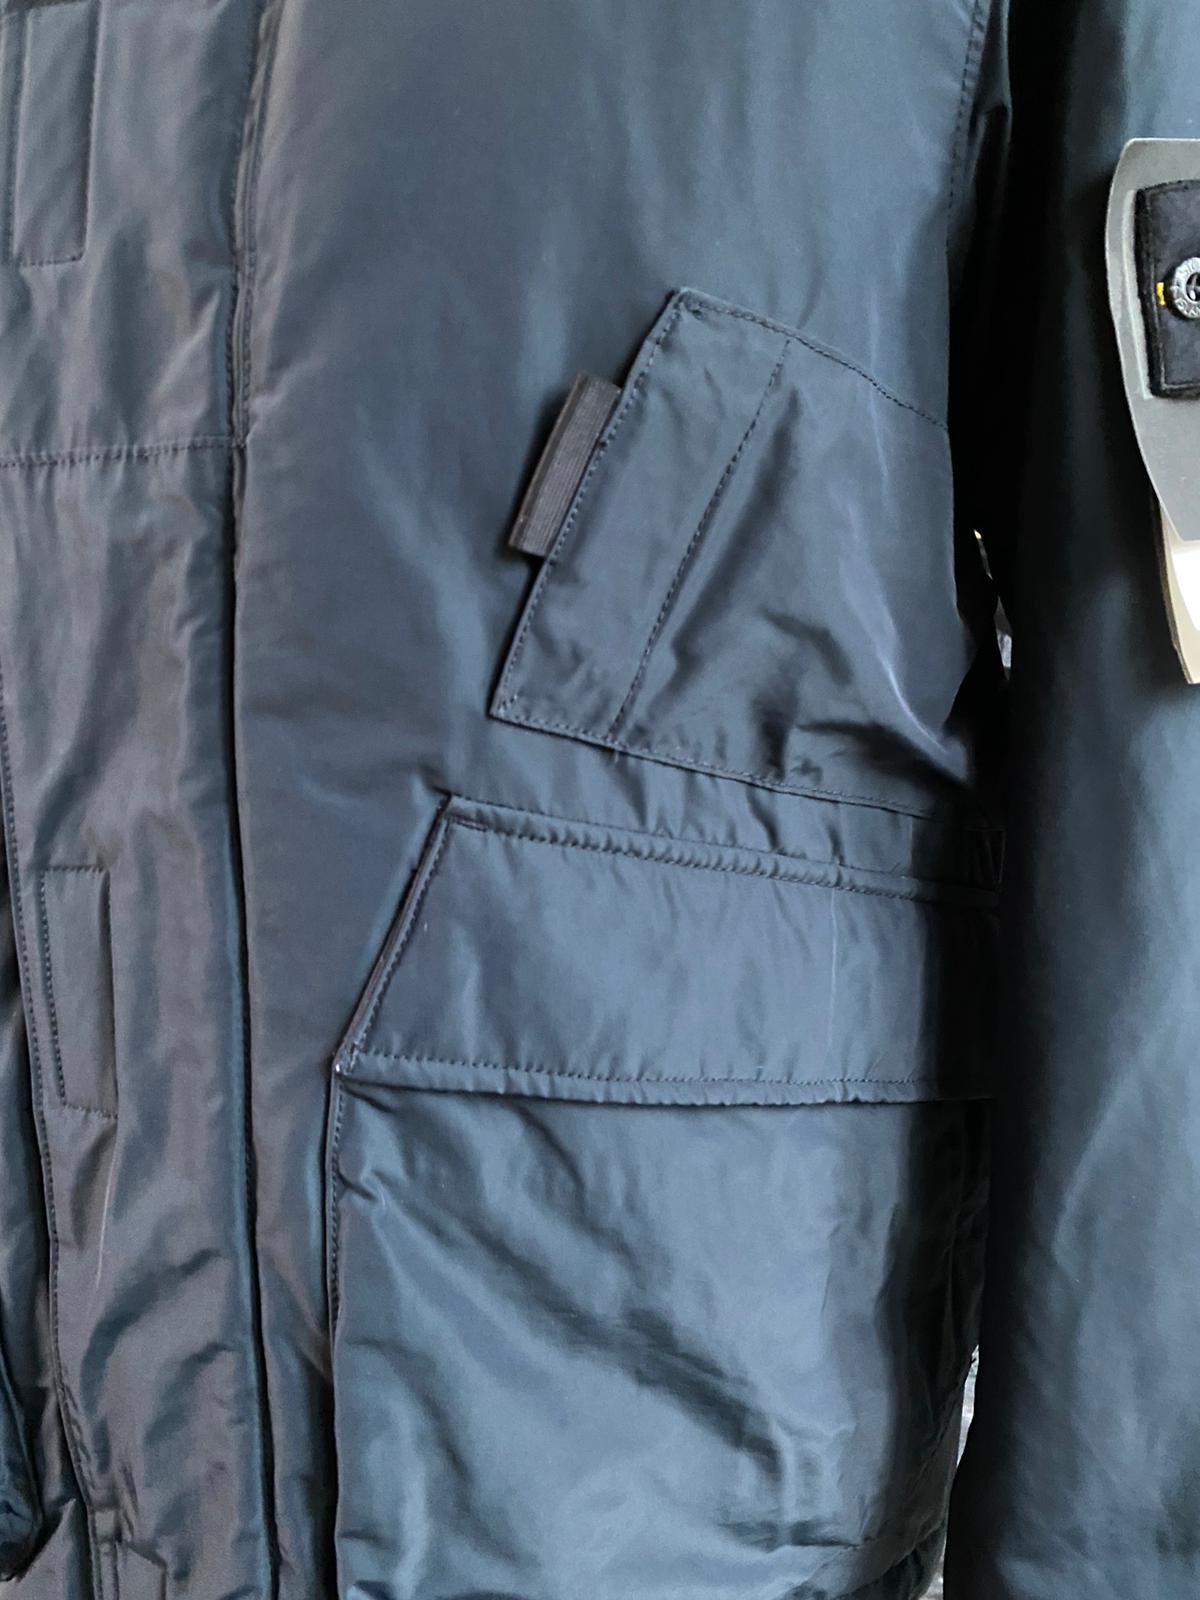 STONE ISLAND MICRO REPS WITH PRIMALOFT INSULATION TECHNOLOGY - X Clothing